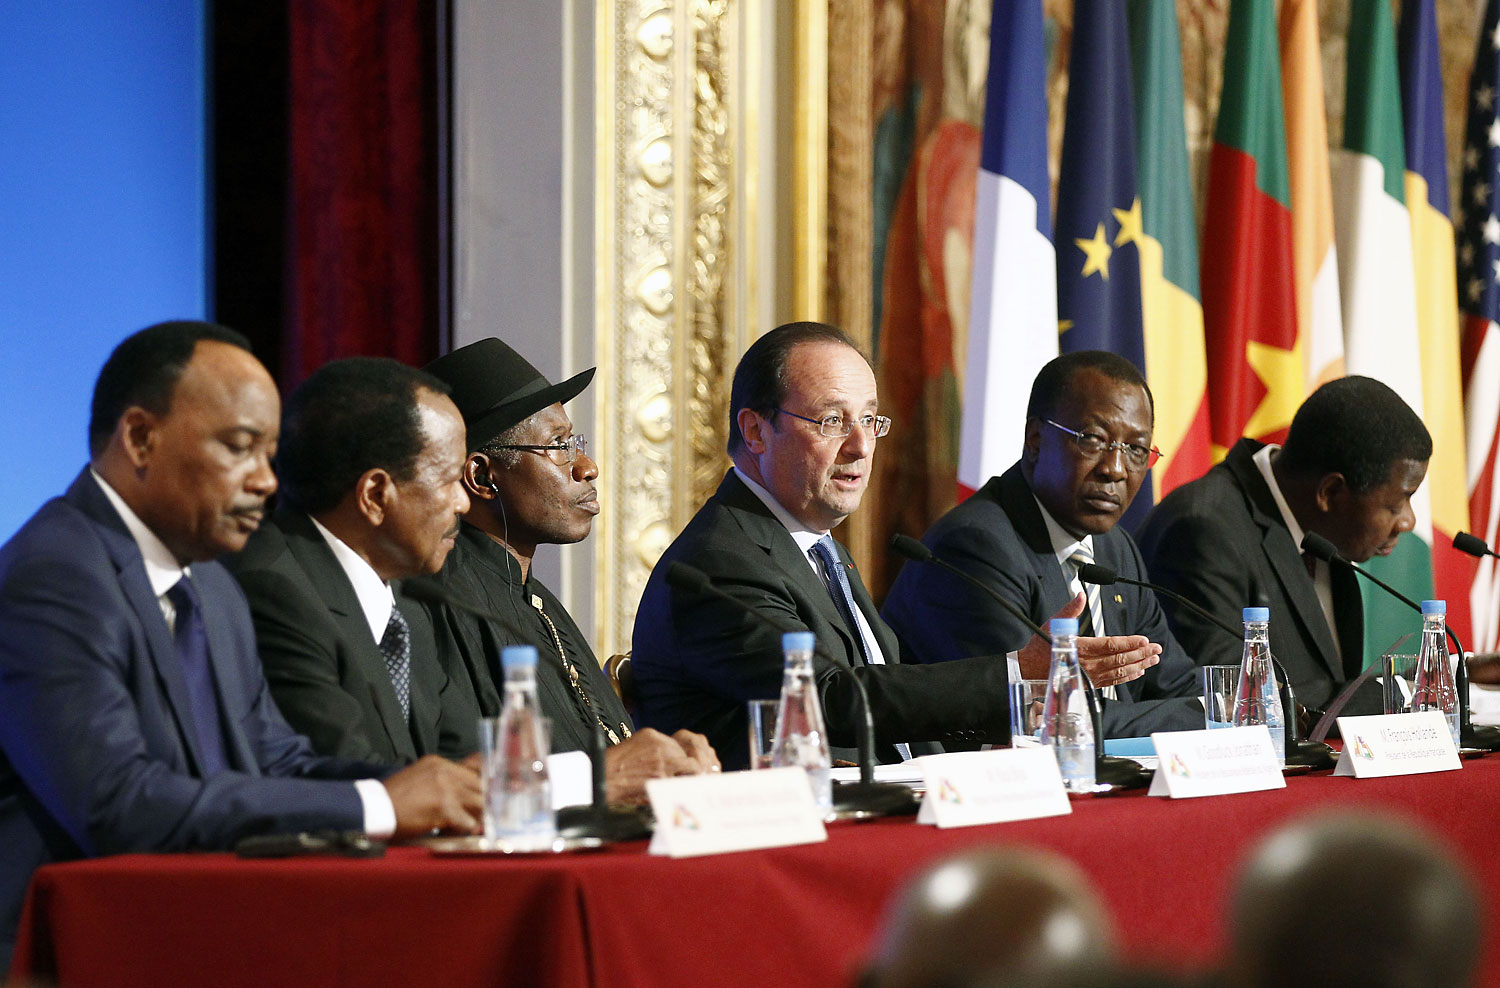 From left: Niger's President Mahamadou Issoufou, Cameroon's President Paul Biya, Nigeria's President Goodluck Jonathan, French President François Hollande, Chad's President Idriss Déby and Benin's President Thomas Boni Yayi attend a  joint press conference at the Élysée Palace in Paris on May 17, 2014 (Thierry Chesnot—Getty Images)